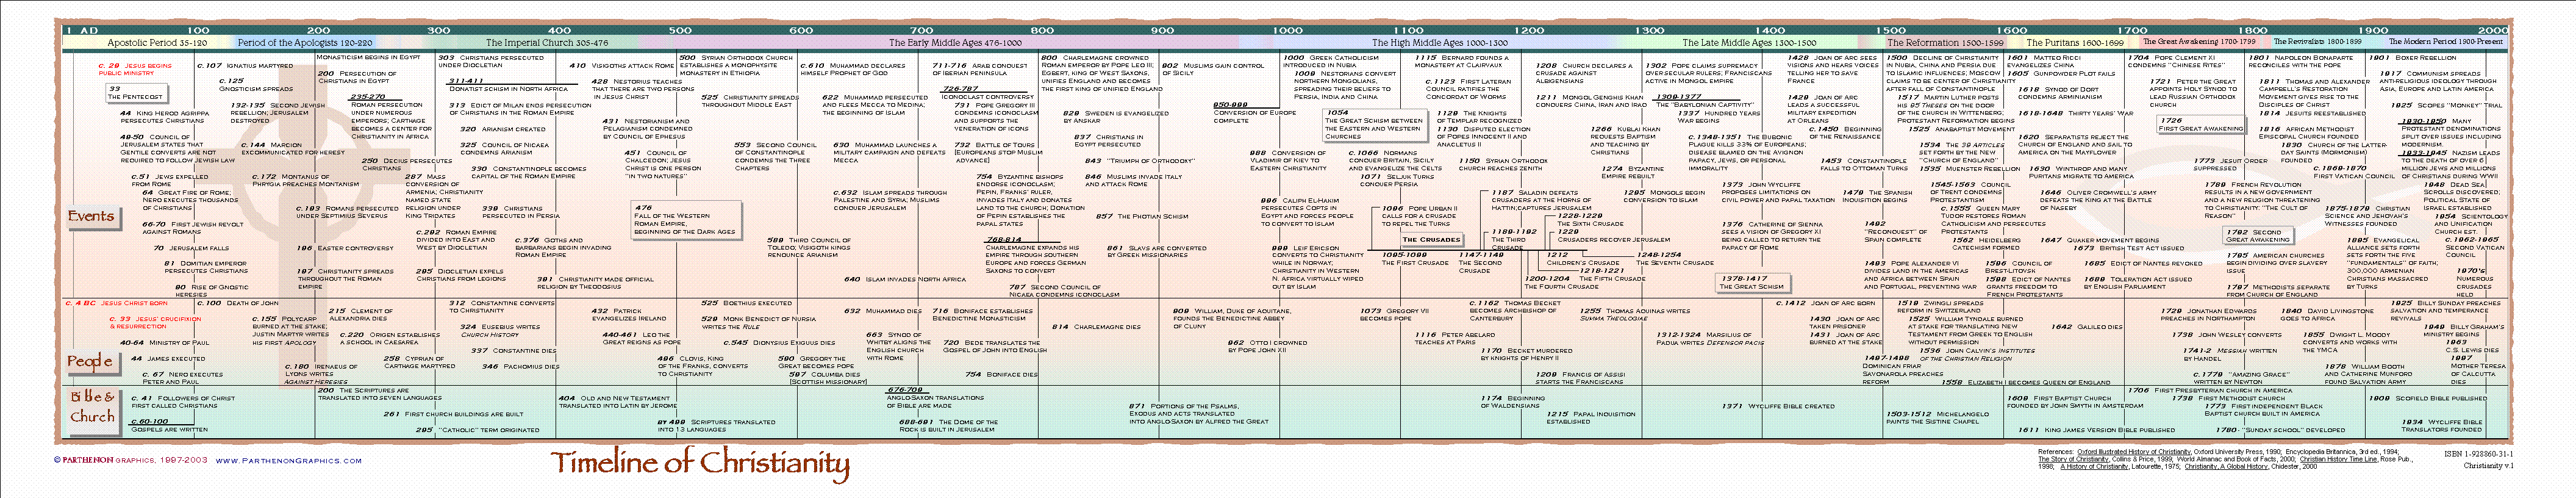 bible timeline with images